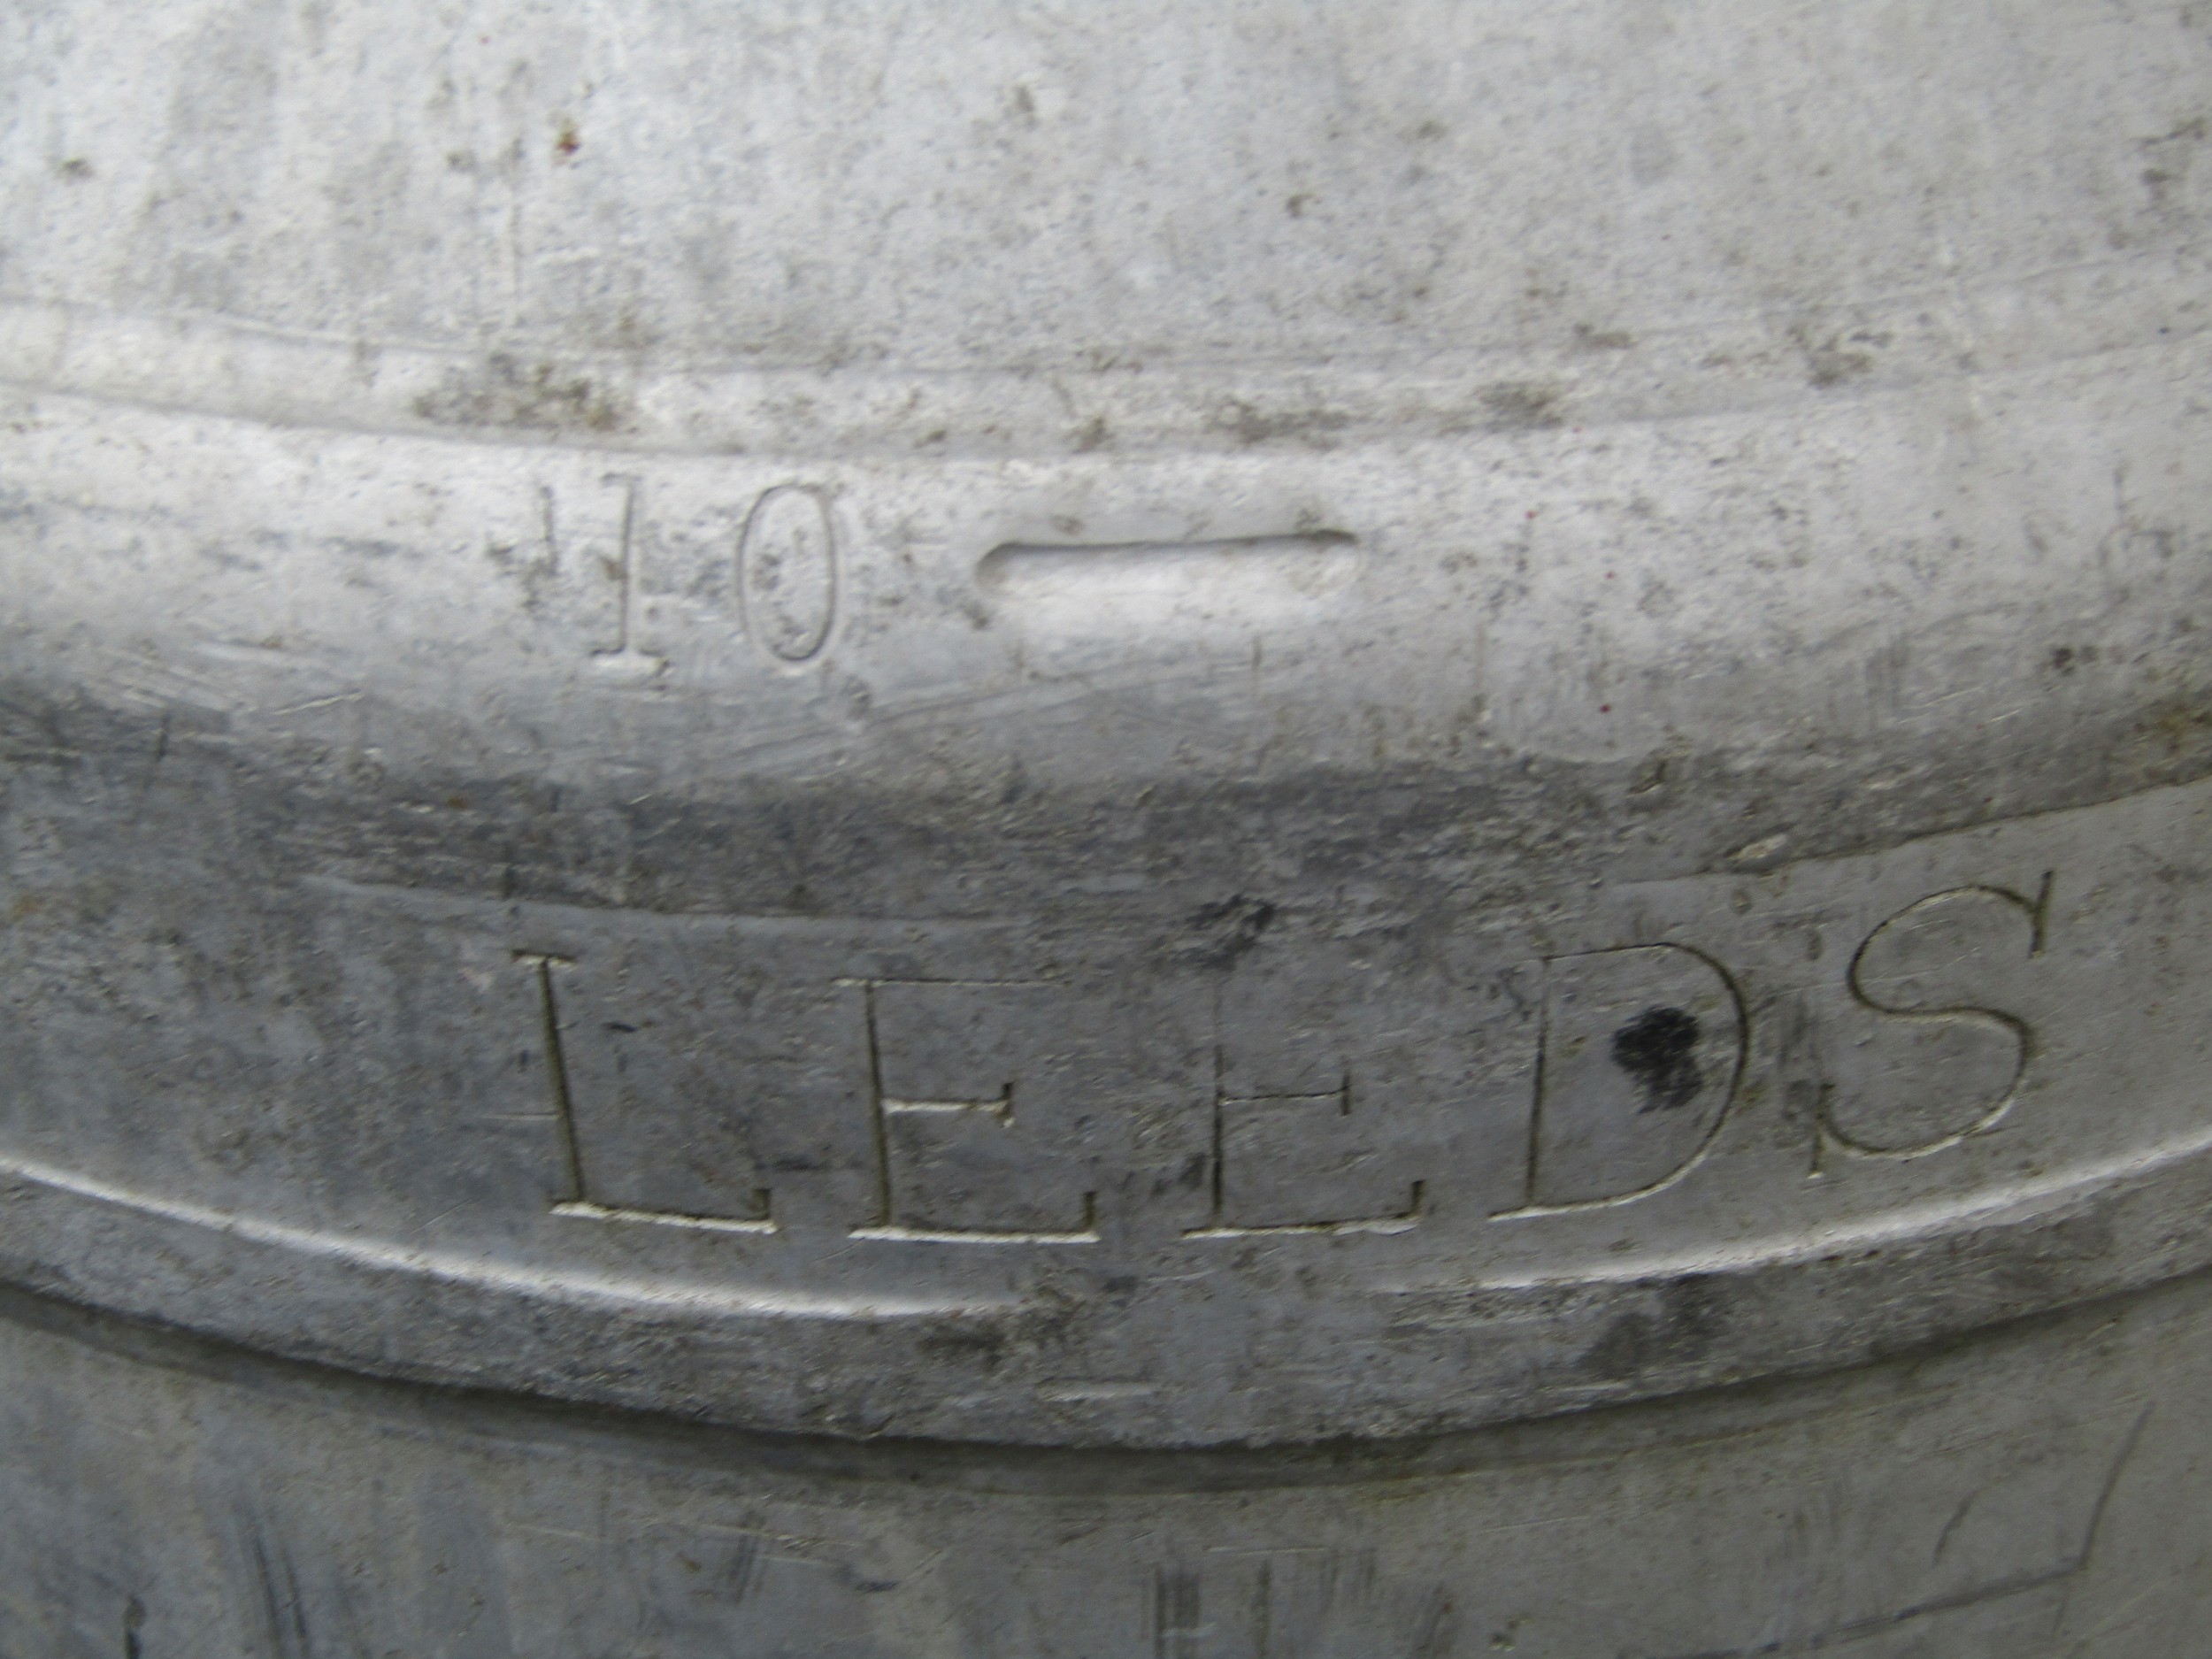 A Grundycan Excraven Dairies, Leeds aluminium two handled milk churn (complete with cap), 72 cm high